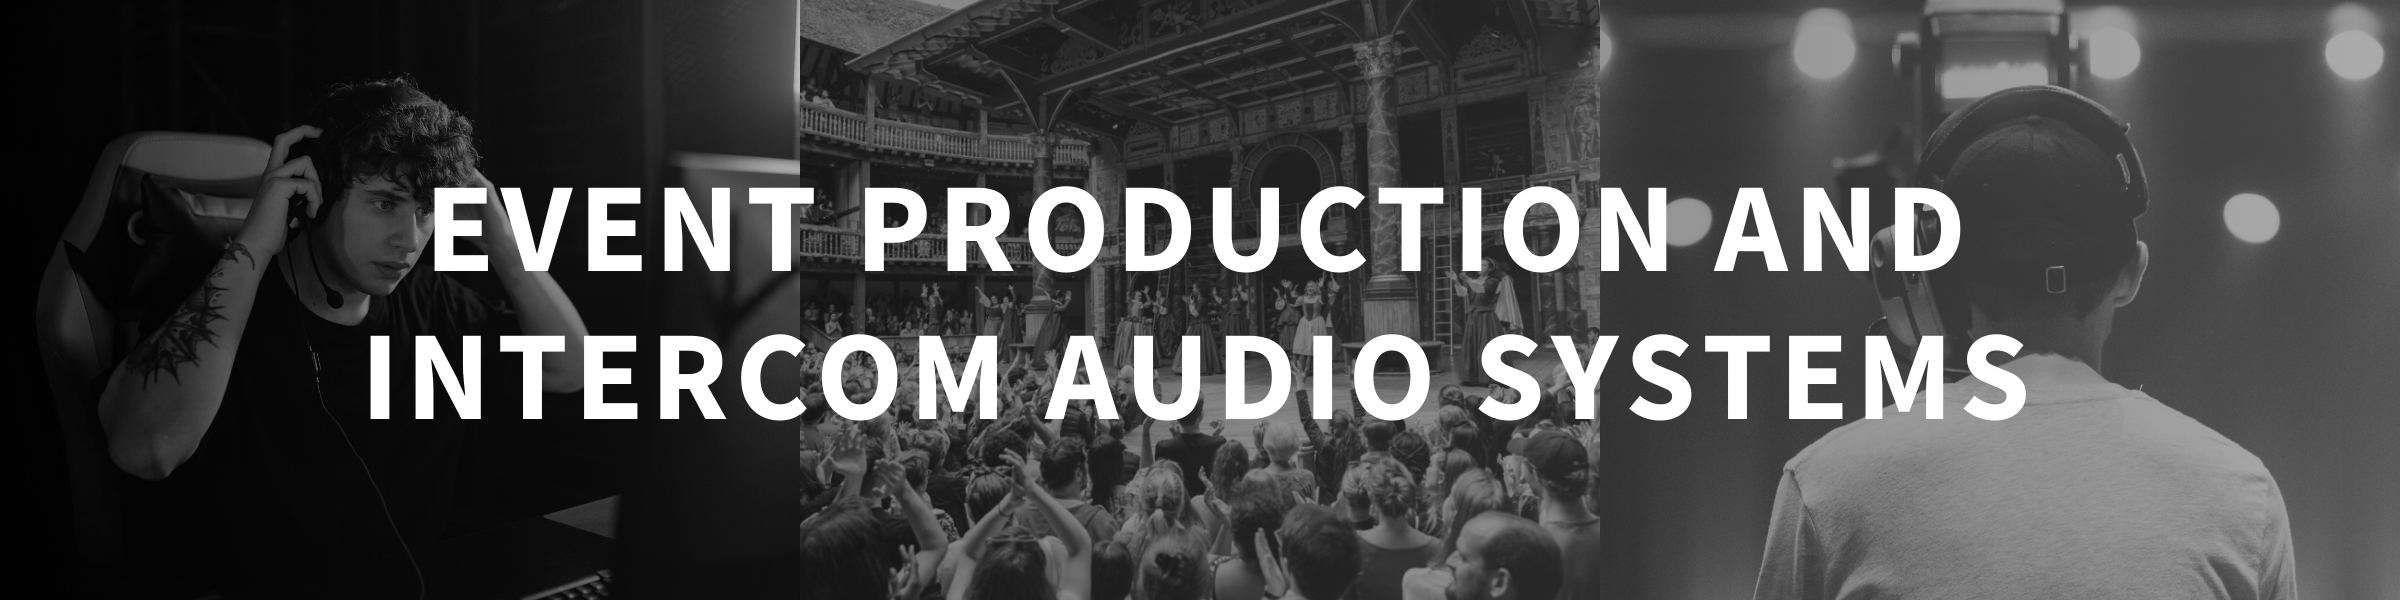 Event Production and Intercom Audio Systems